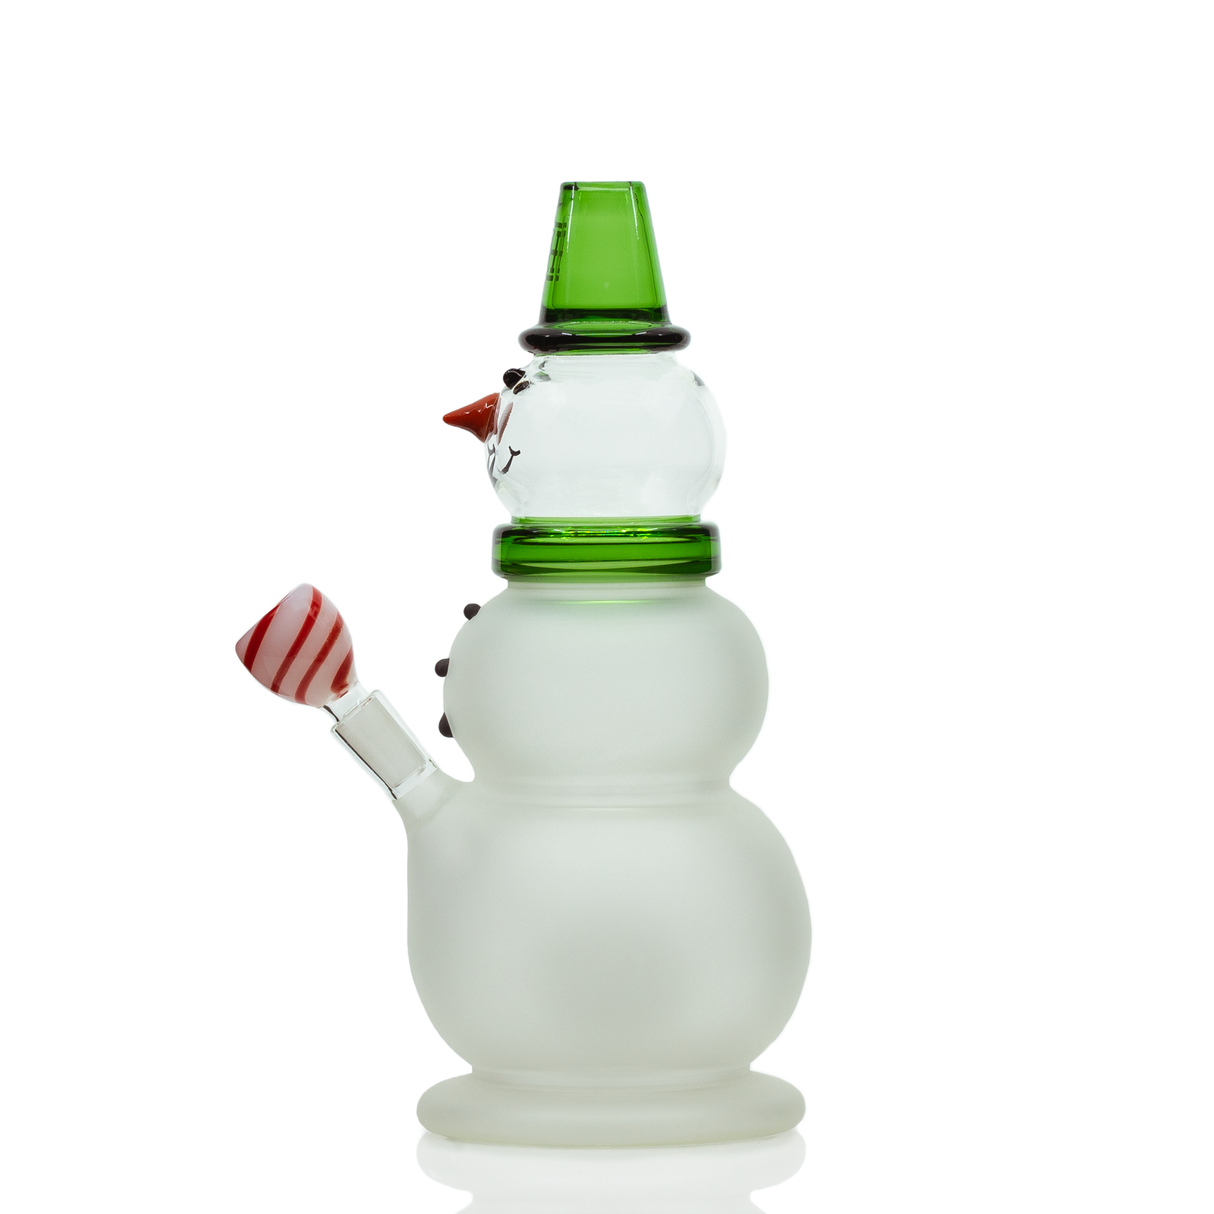 Hemper Snowman XL Bong front view with festive design and 45-degree joint